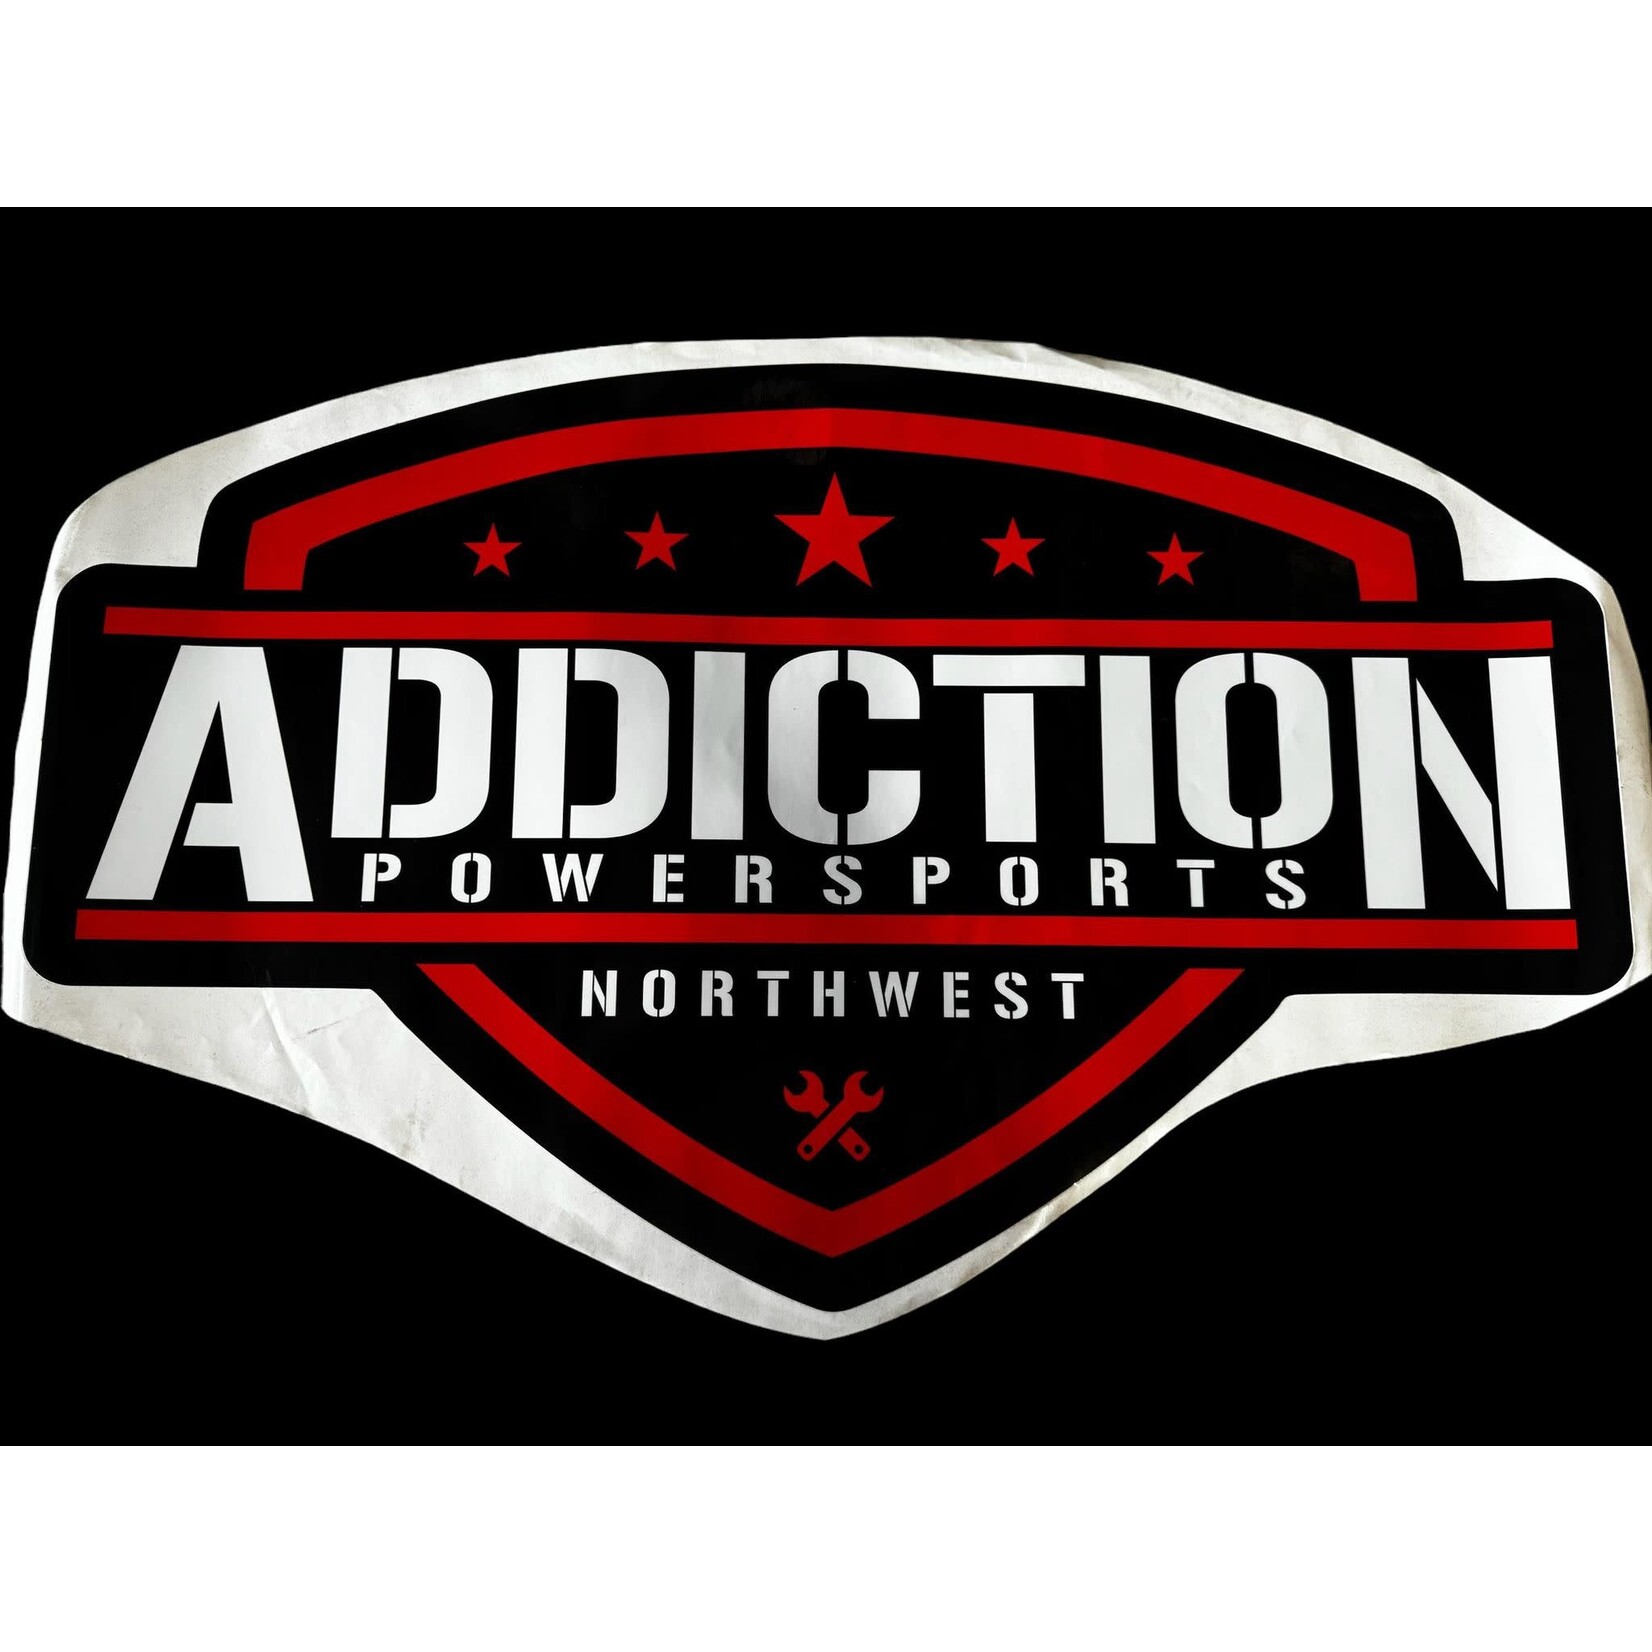 Addiction powersports NW  Decal